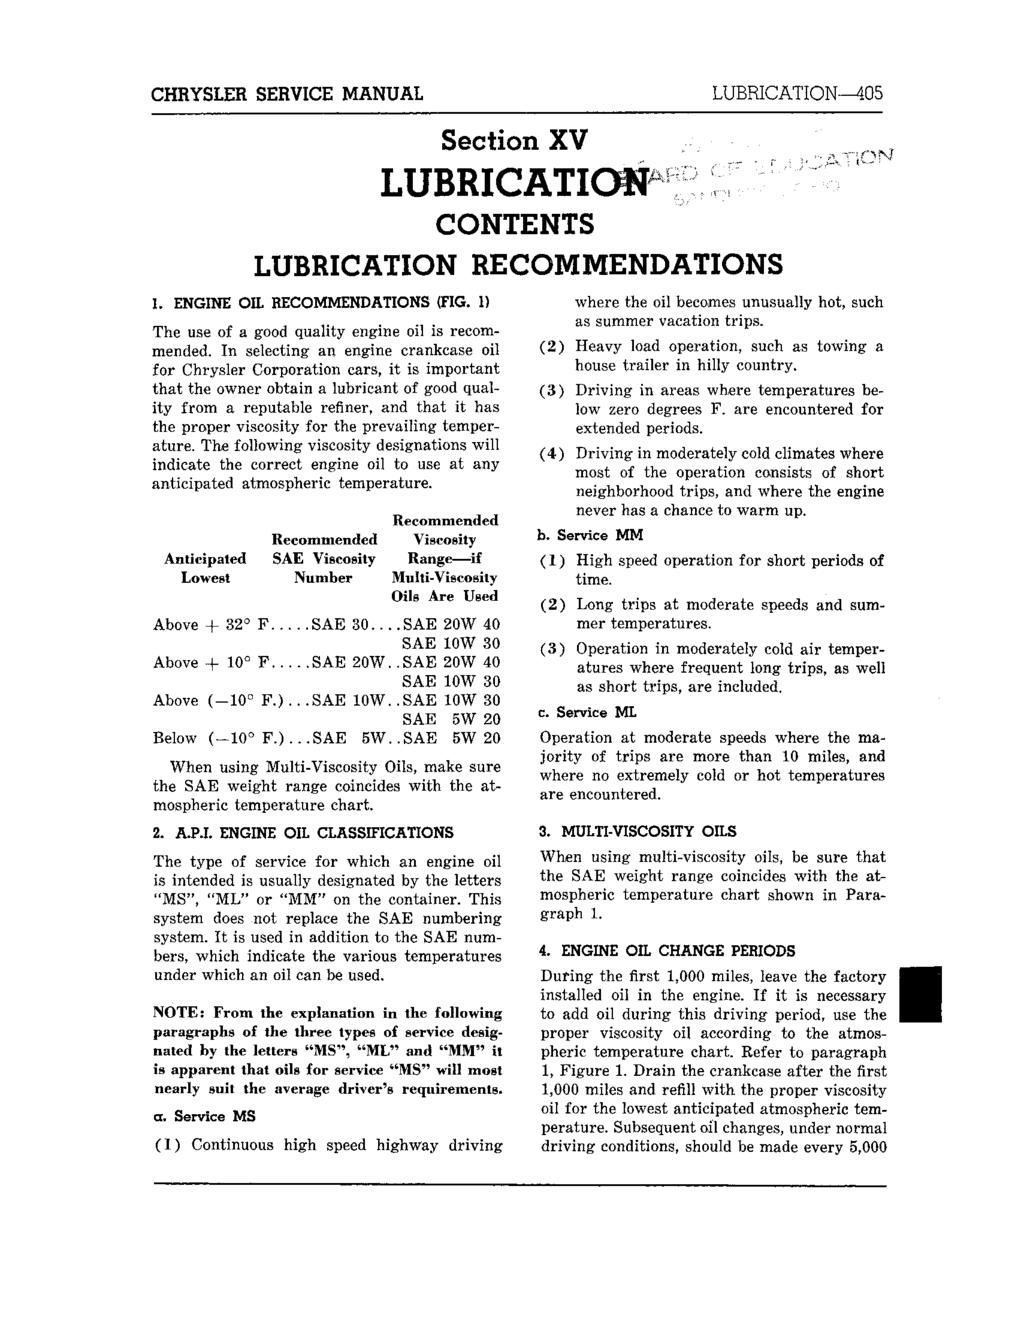 CHRYSLEH SE1VICE MANUAL LUBRICATION 405 Section X LUBRICATION CONTENTS LUBRICATION RECOMMENDATIONS 1. ENGINE OIL BECOMMENDATIONS (FIG. 1) The use of a good quality engine oil is recommended.